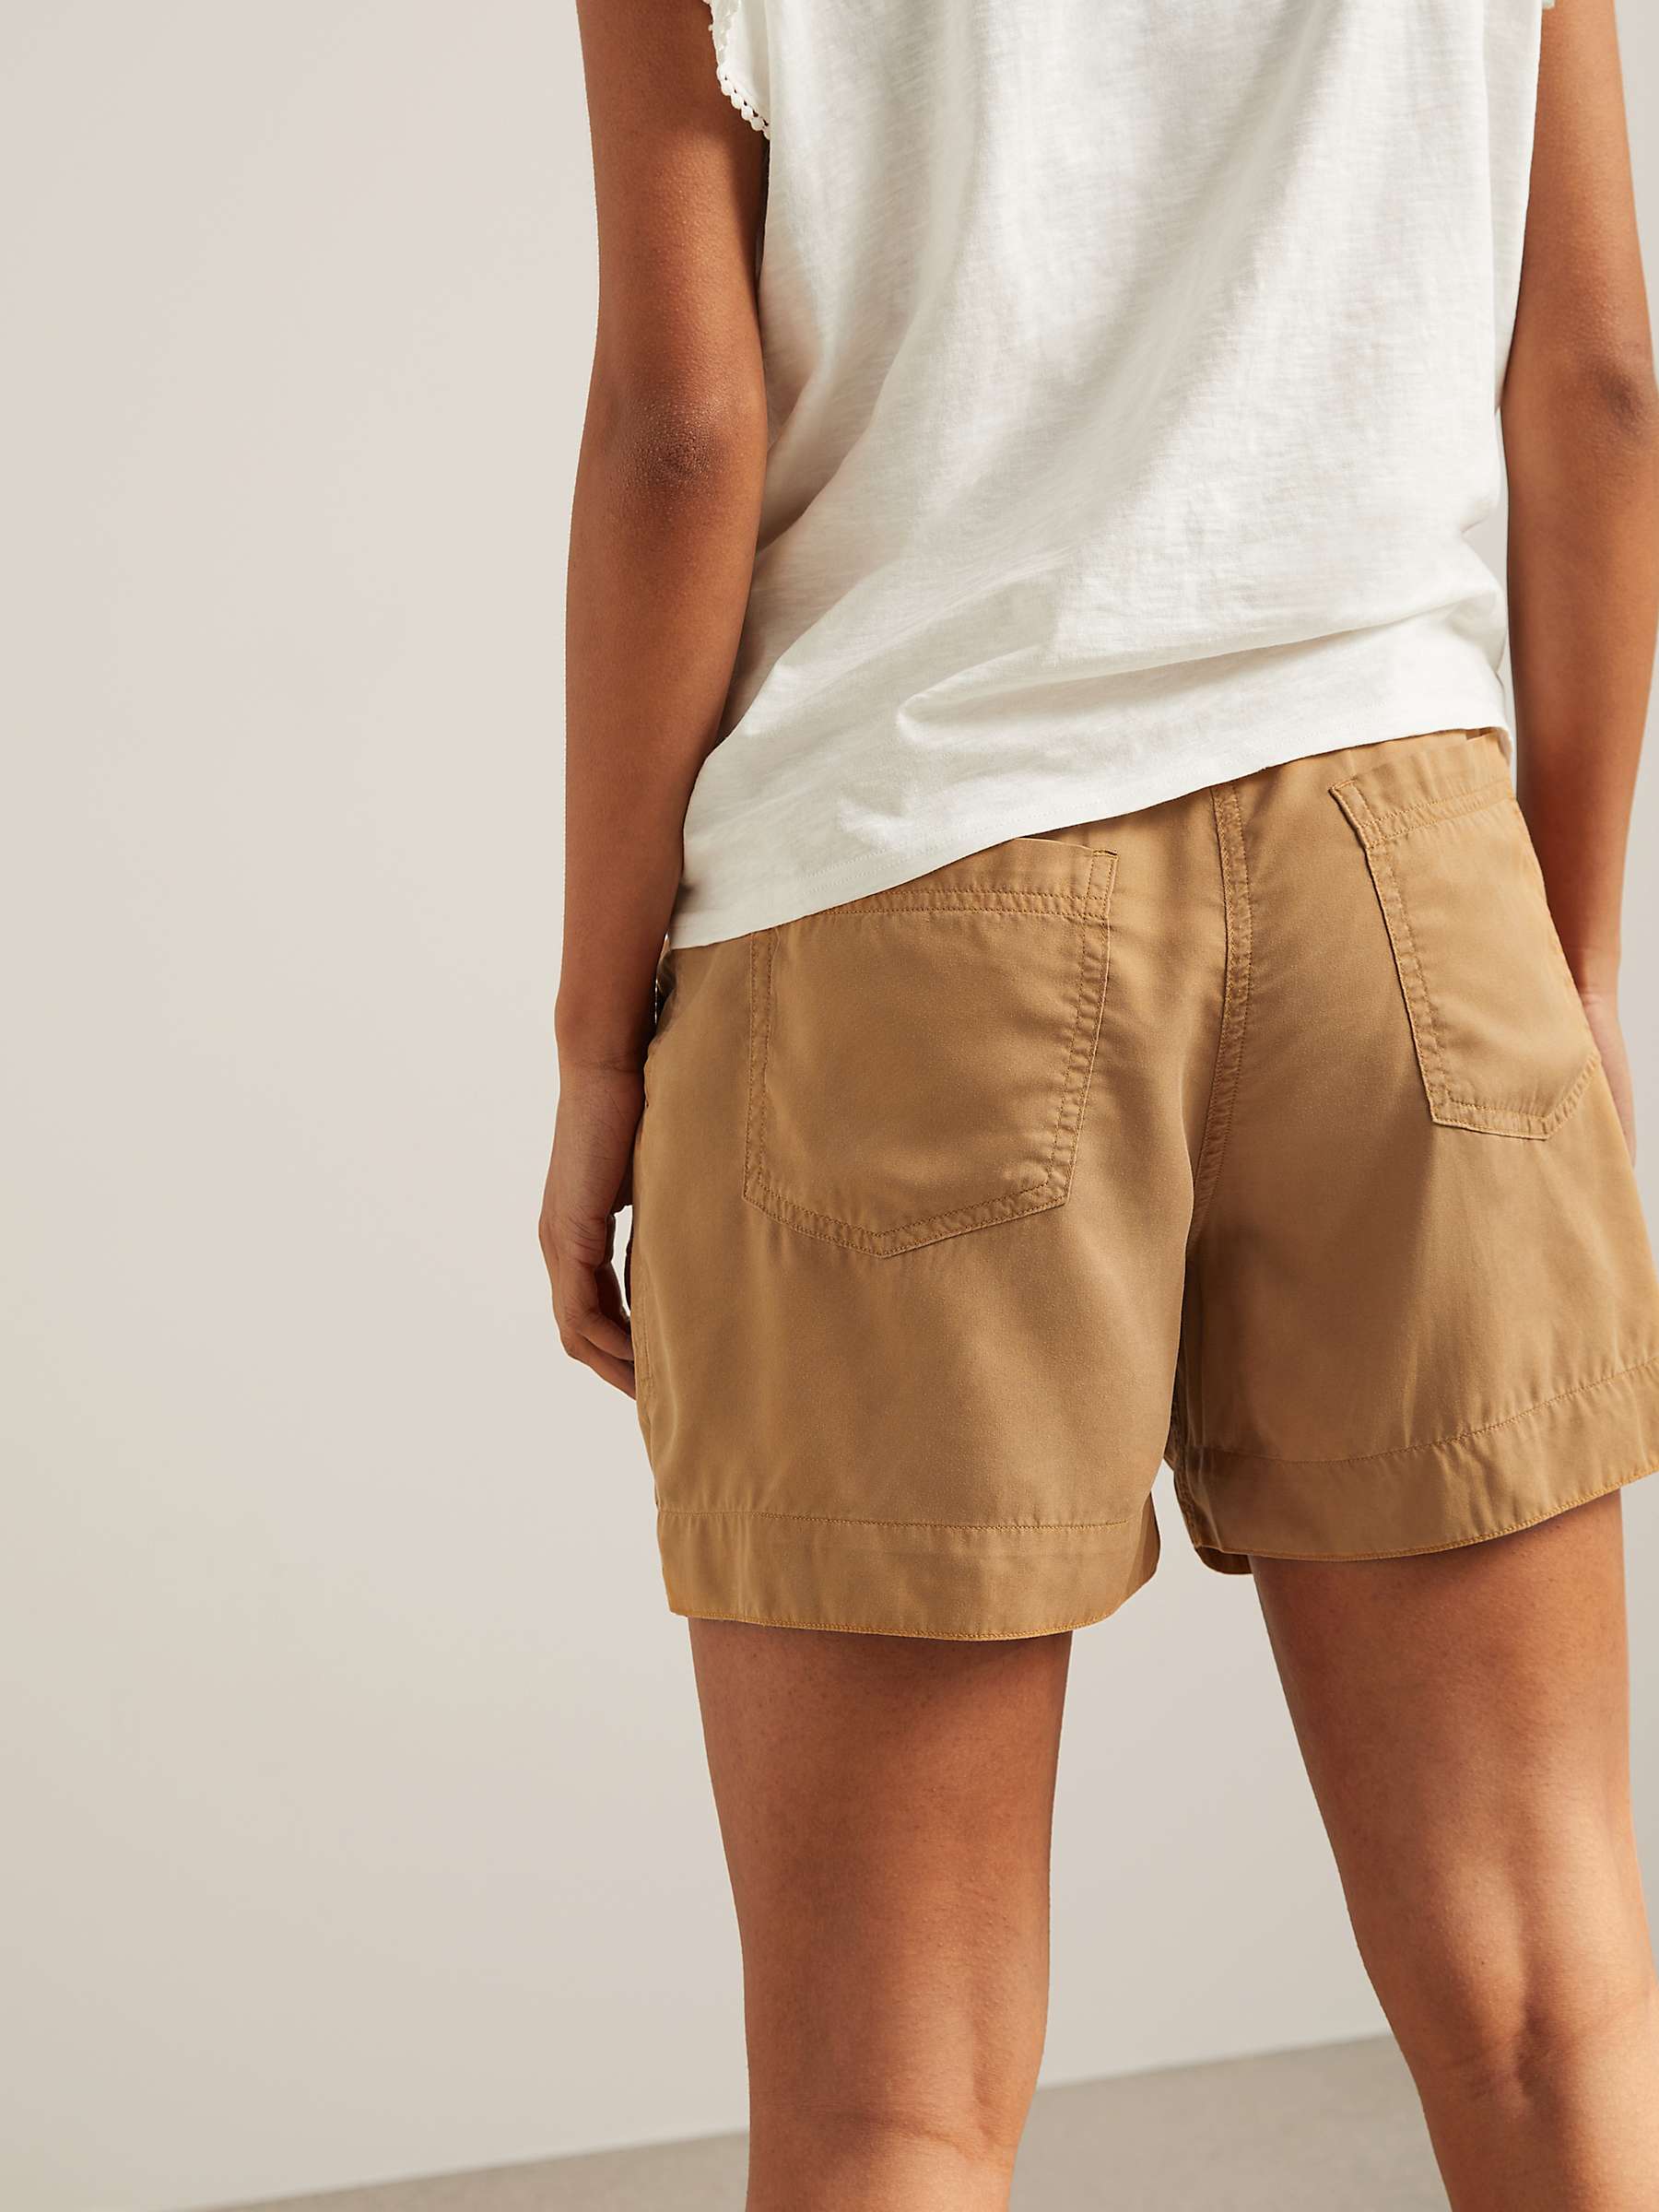 AND/OR Pippa Bow Waist Shorts, Nutmeg at John Lewis & Partners